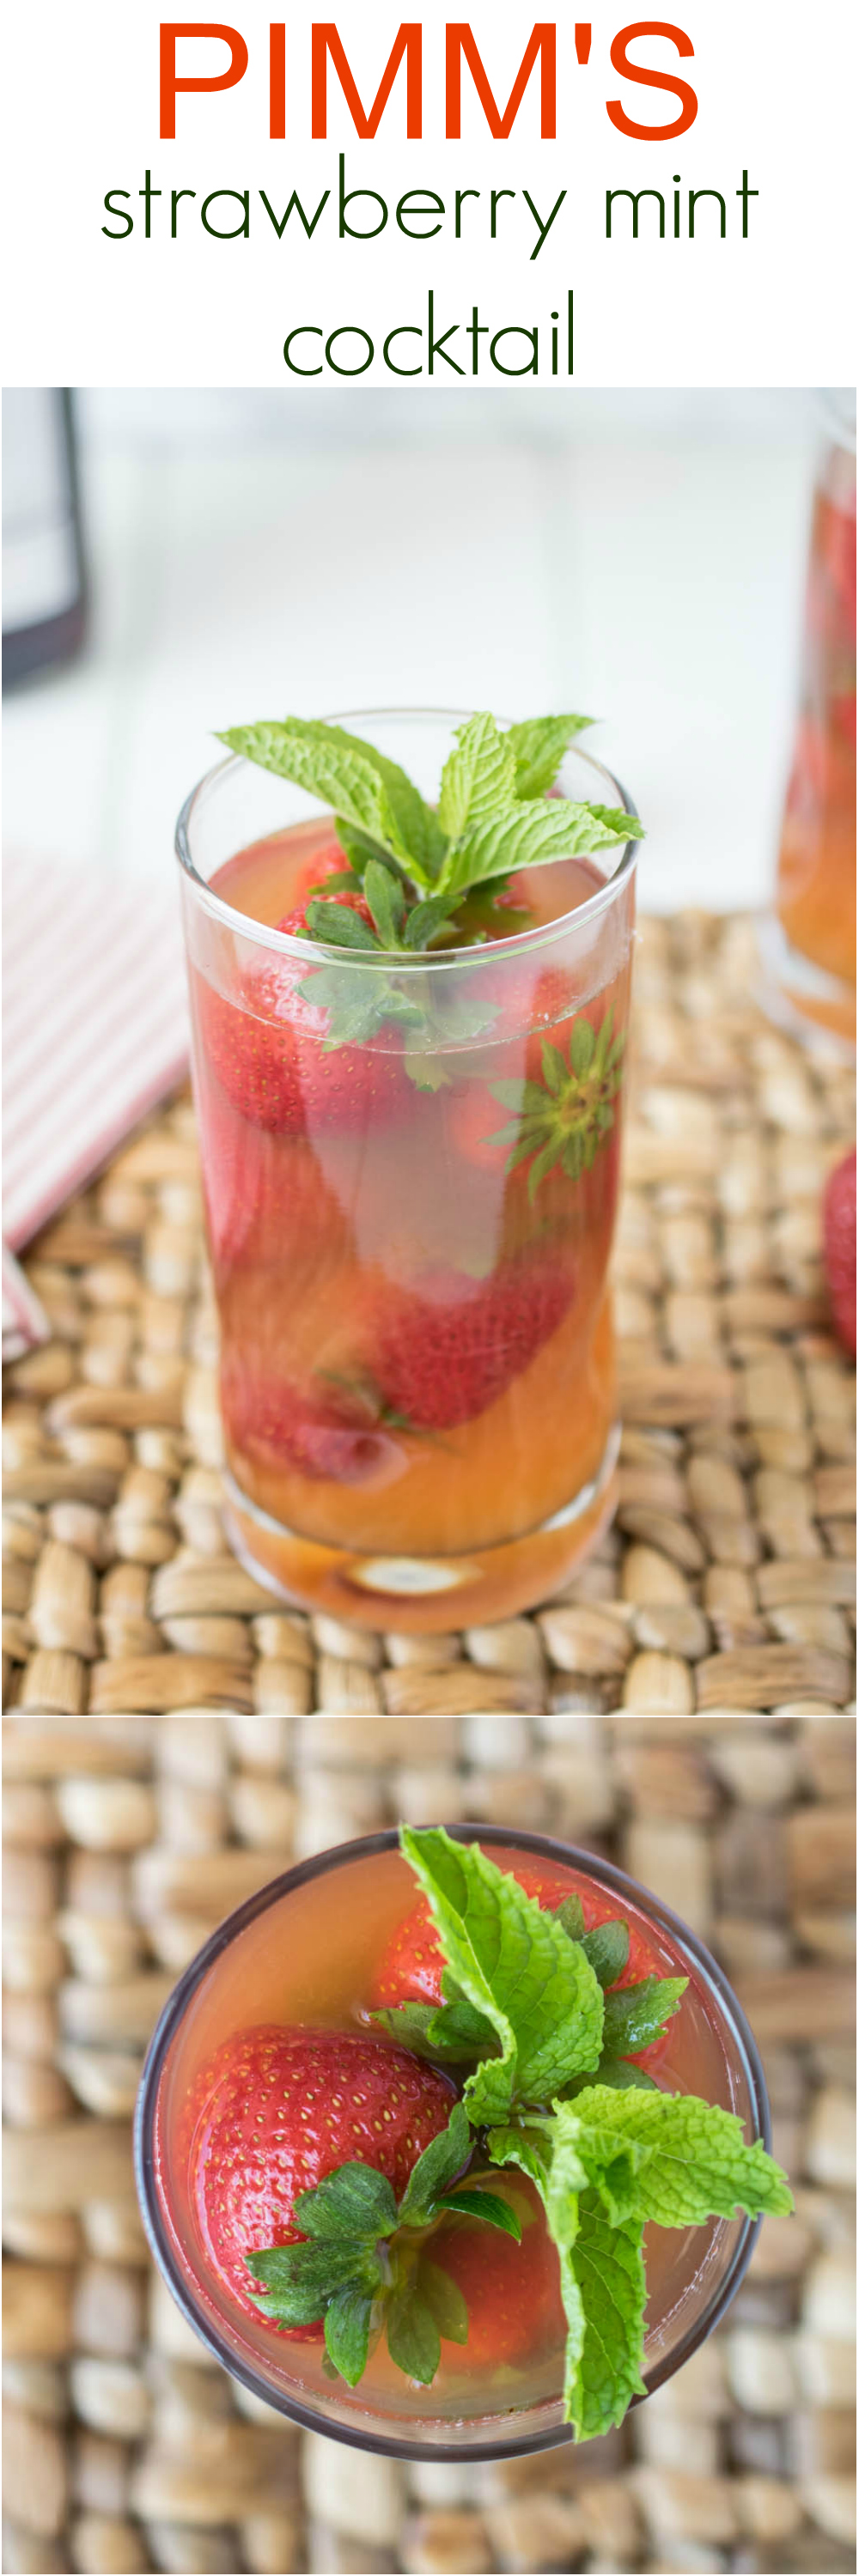 Pimm's strawberry mint cocktail is cooling and refreshing. Pimm's, blended fresh strawberries & mint and lemonade are shaken with ice and served over frozen strawberries.